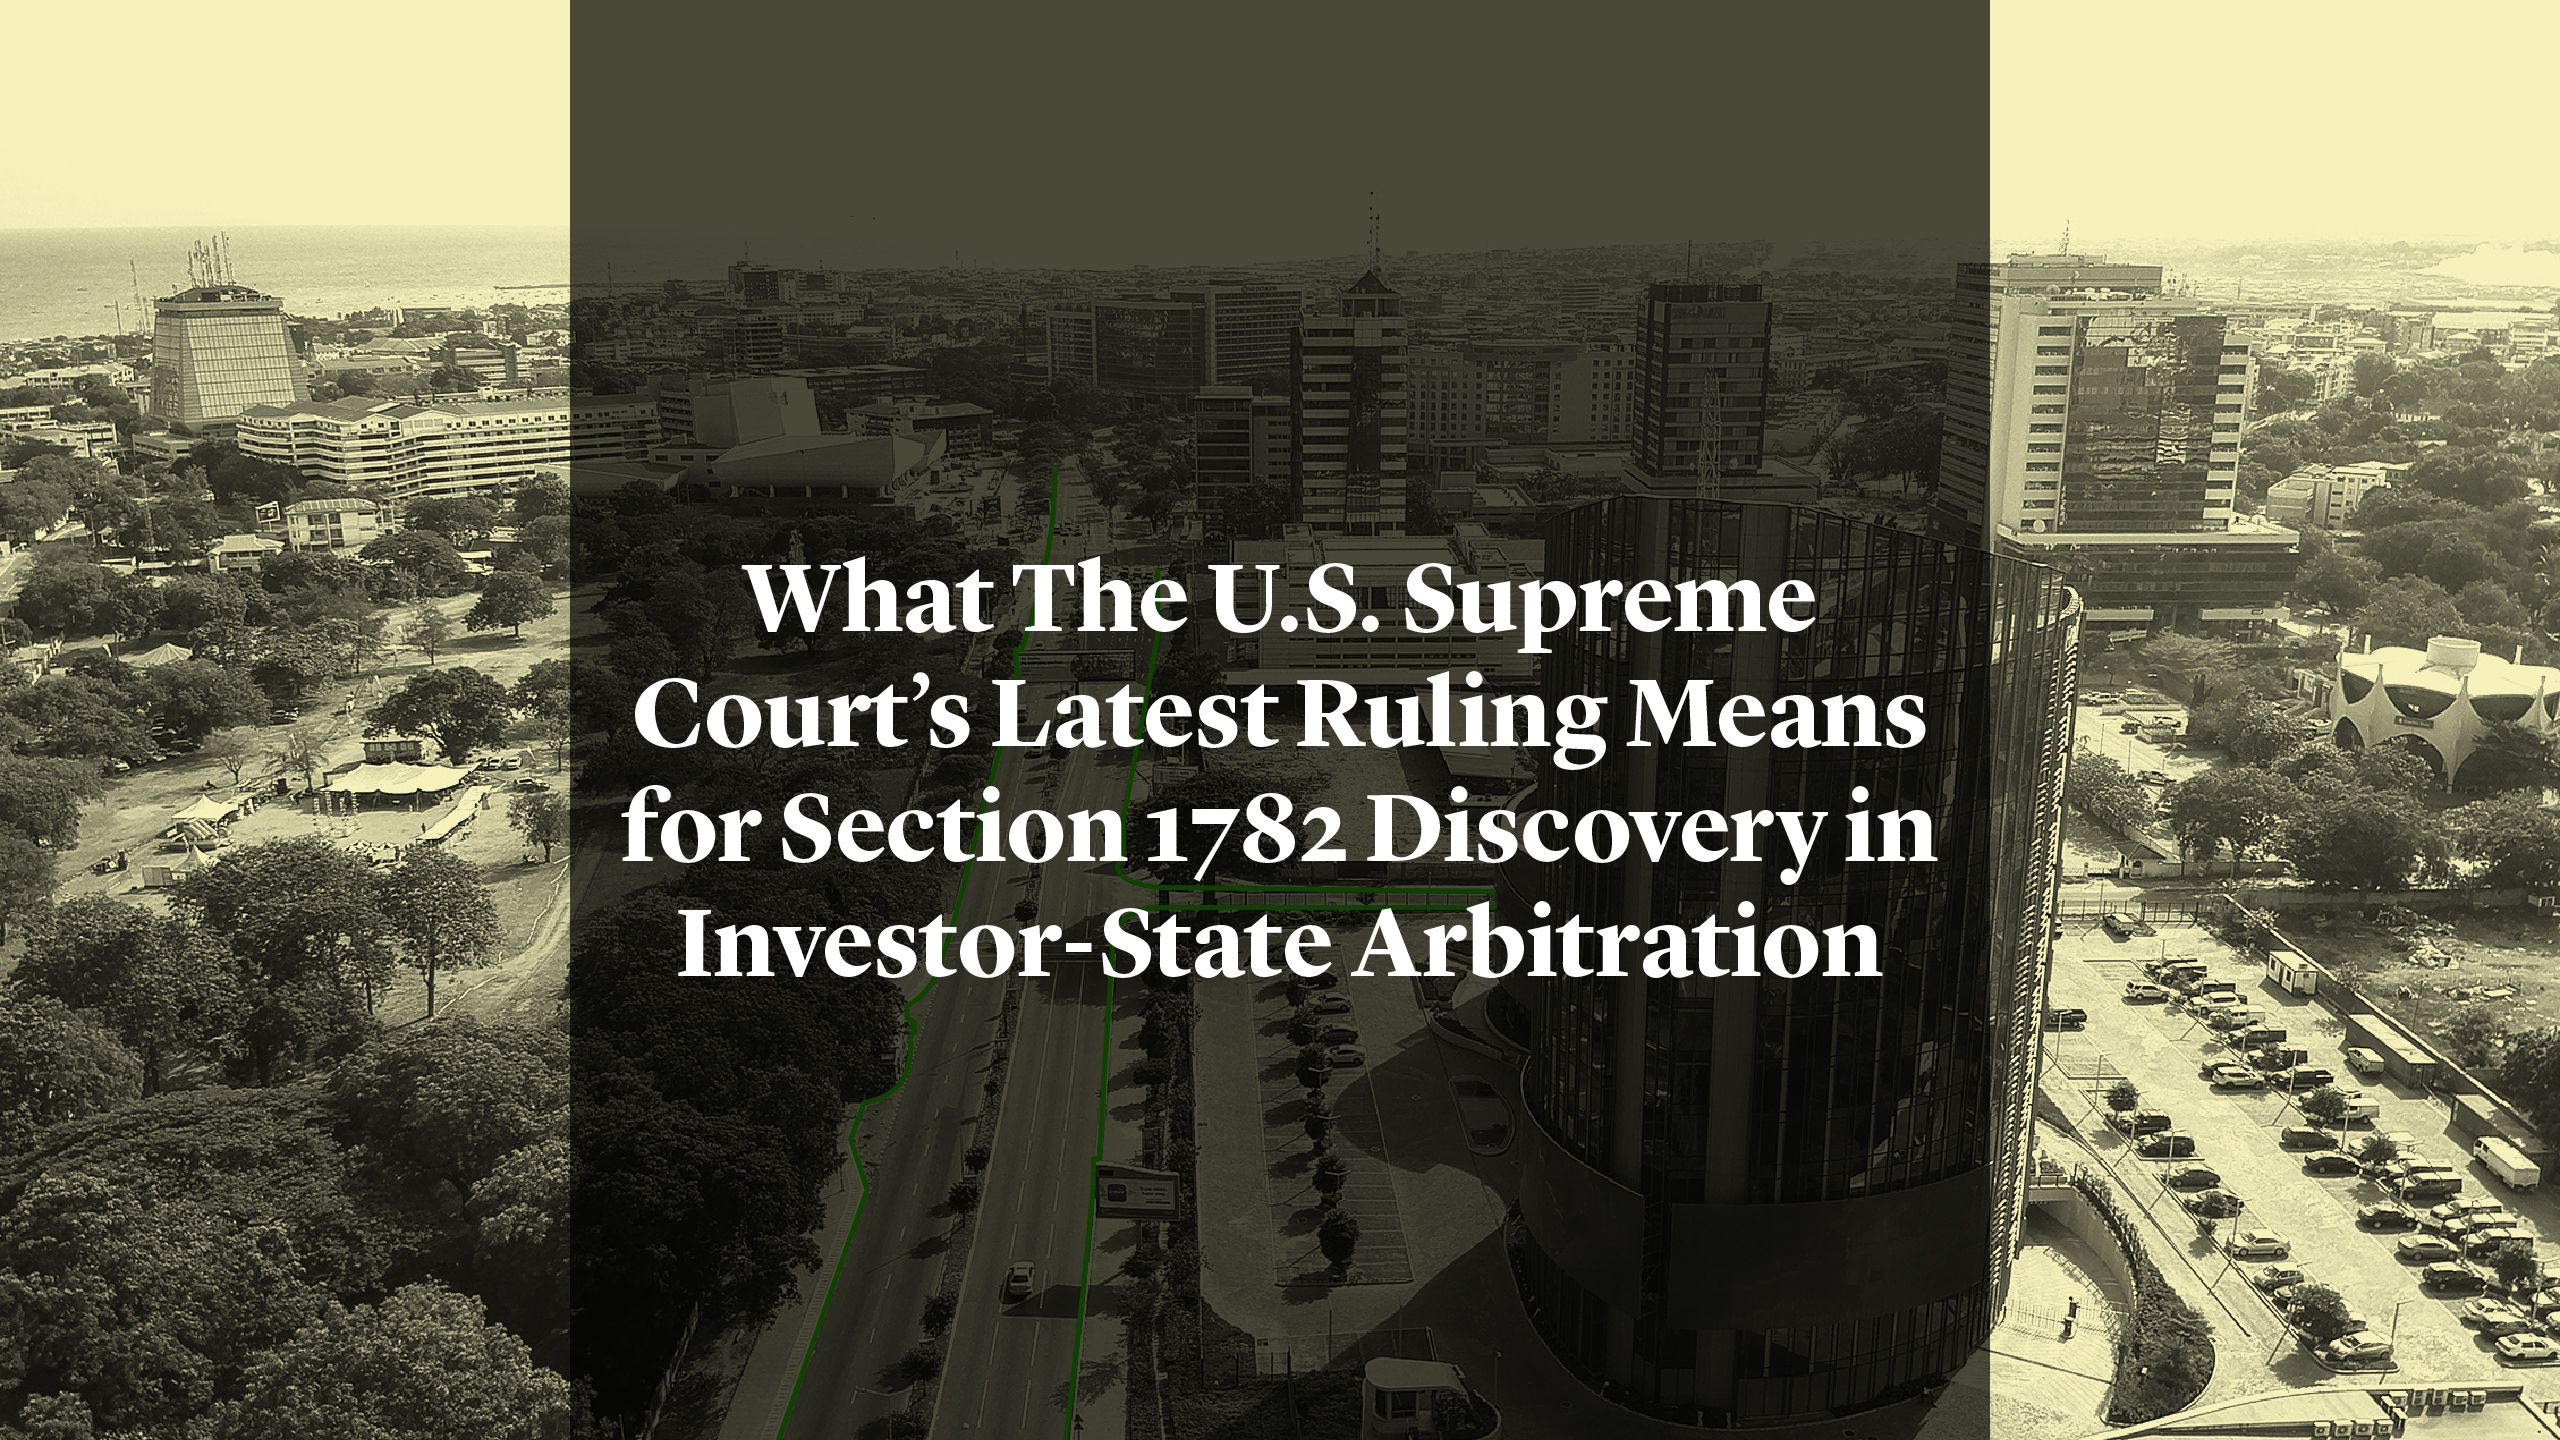 Cleary Gottlieb - What The U.S. Supreme Court’s Latest Ruling Means for Section 1782 Discovery in Investor-State Arbitration